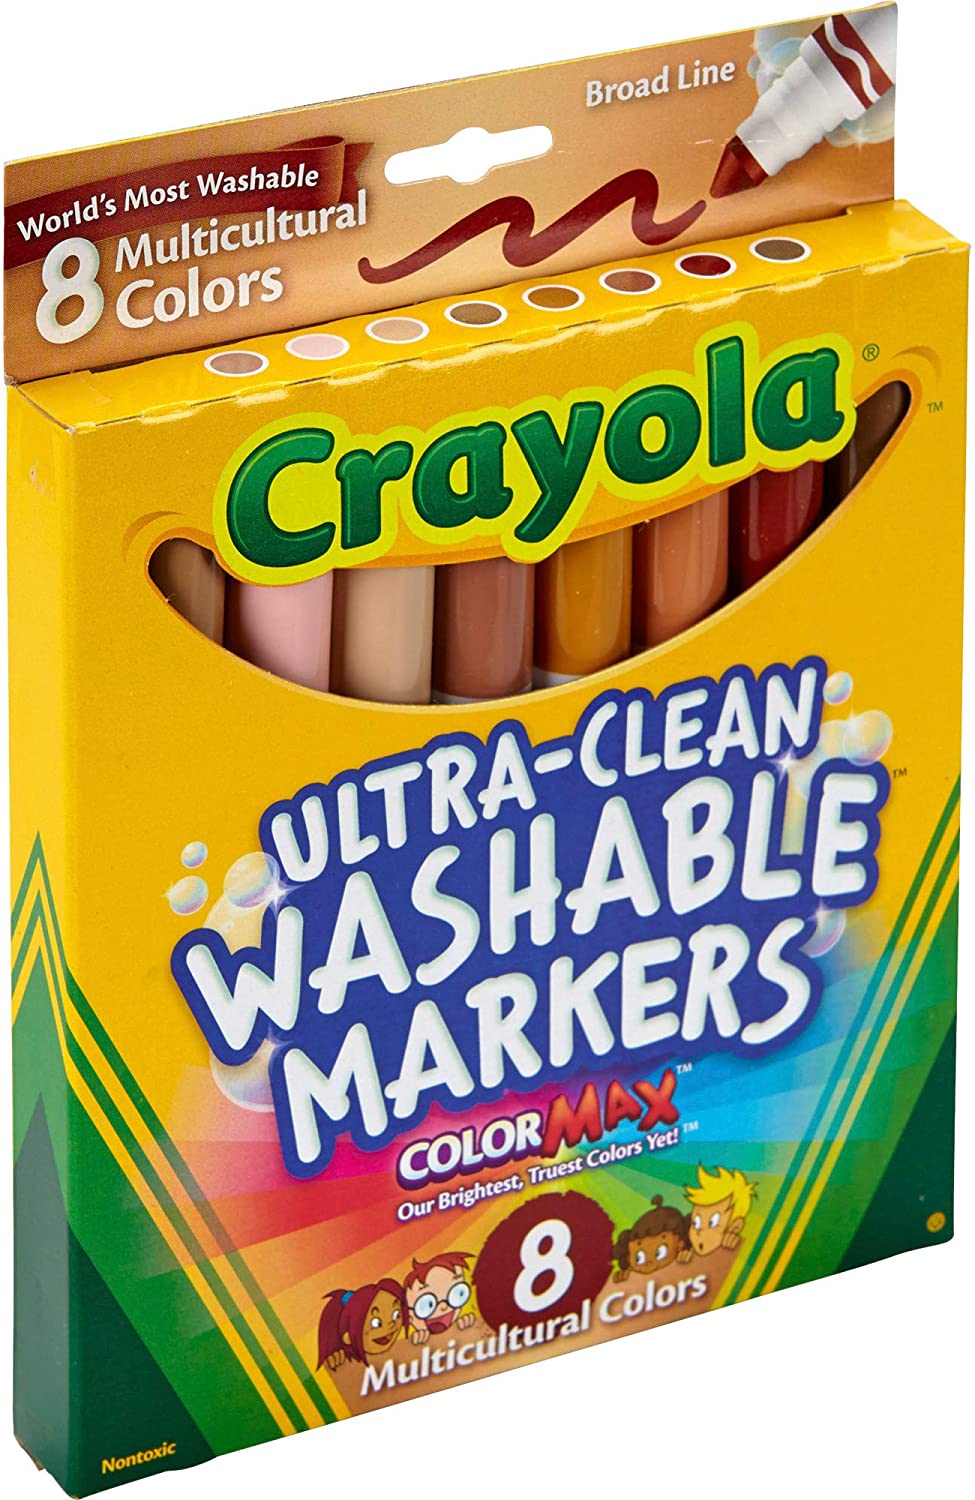 Crayola Ultra-Clean Washable Multicultural Markers